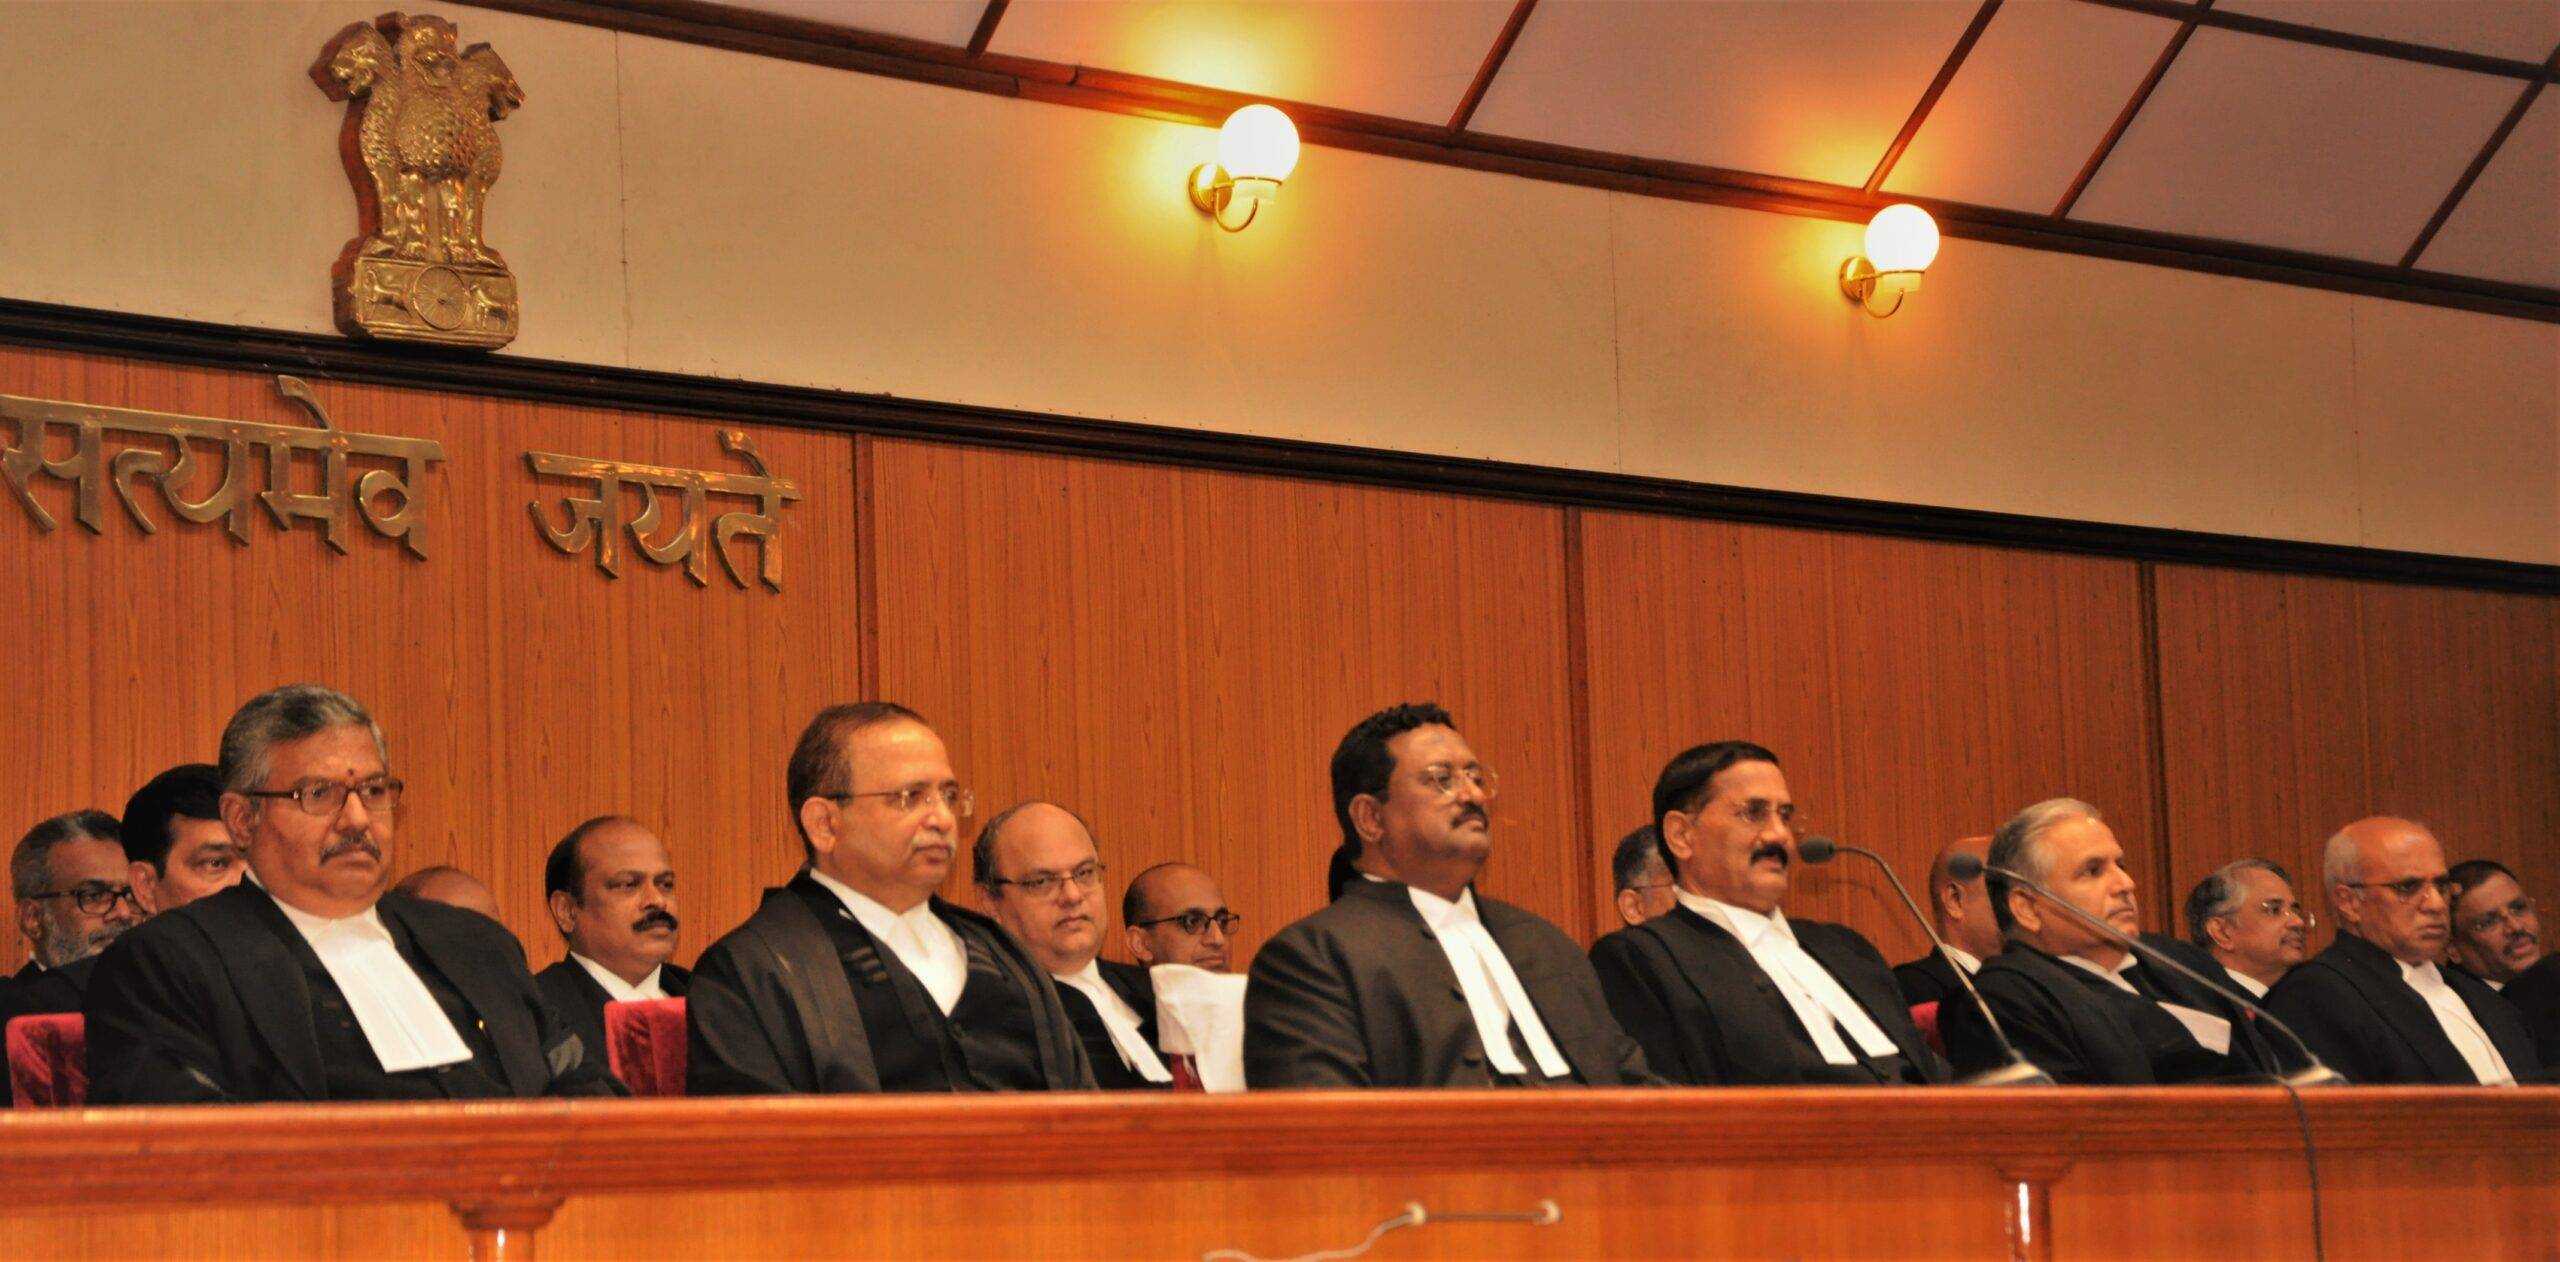 High court judge scaled